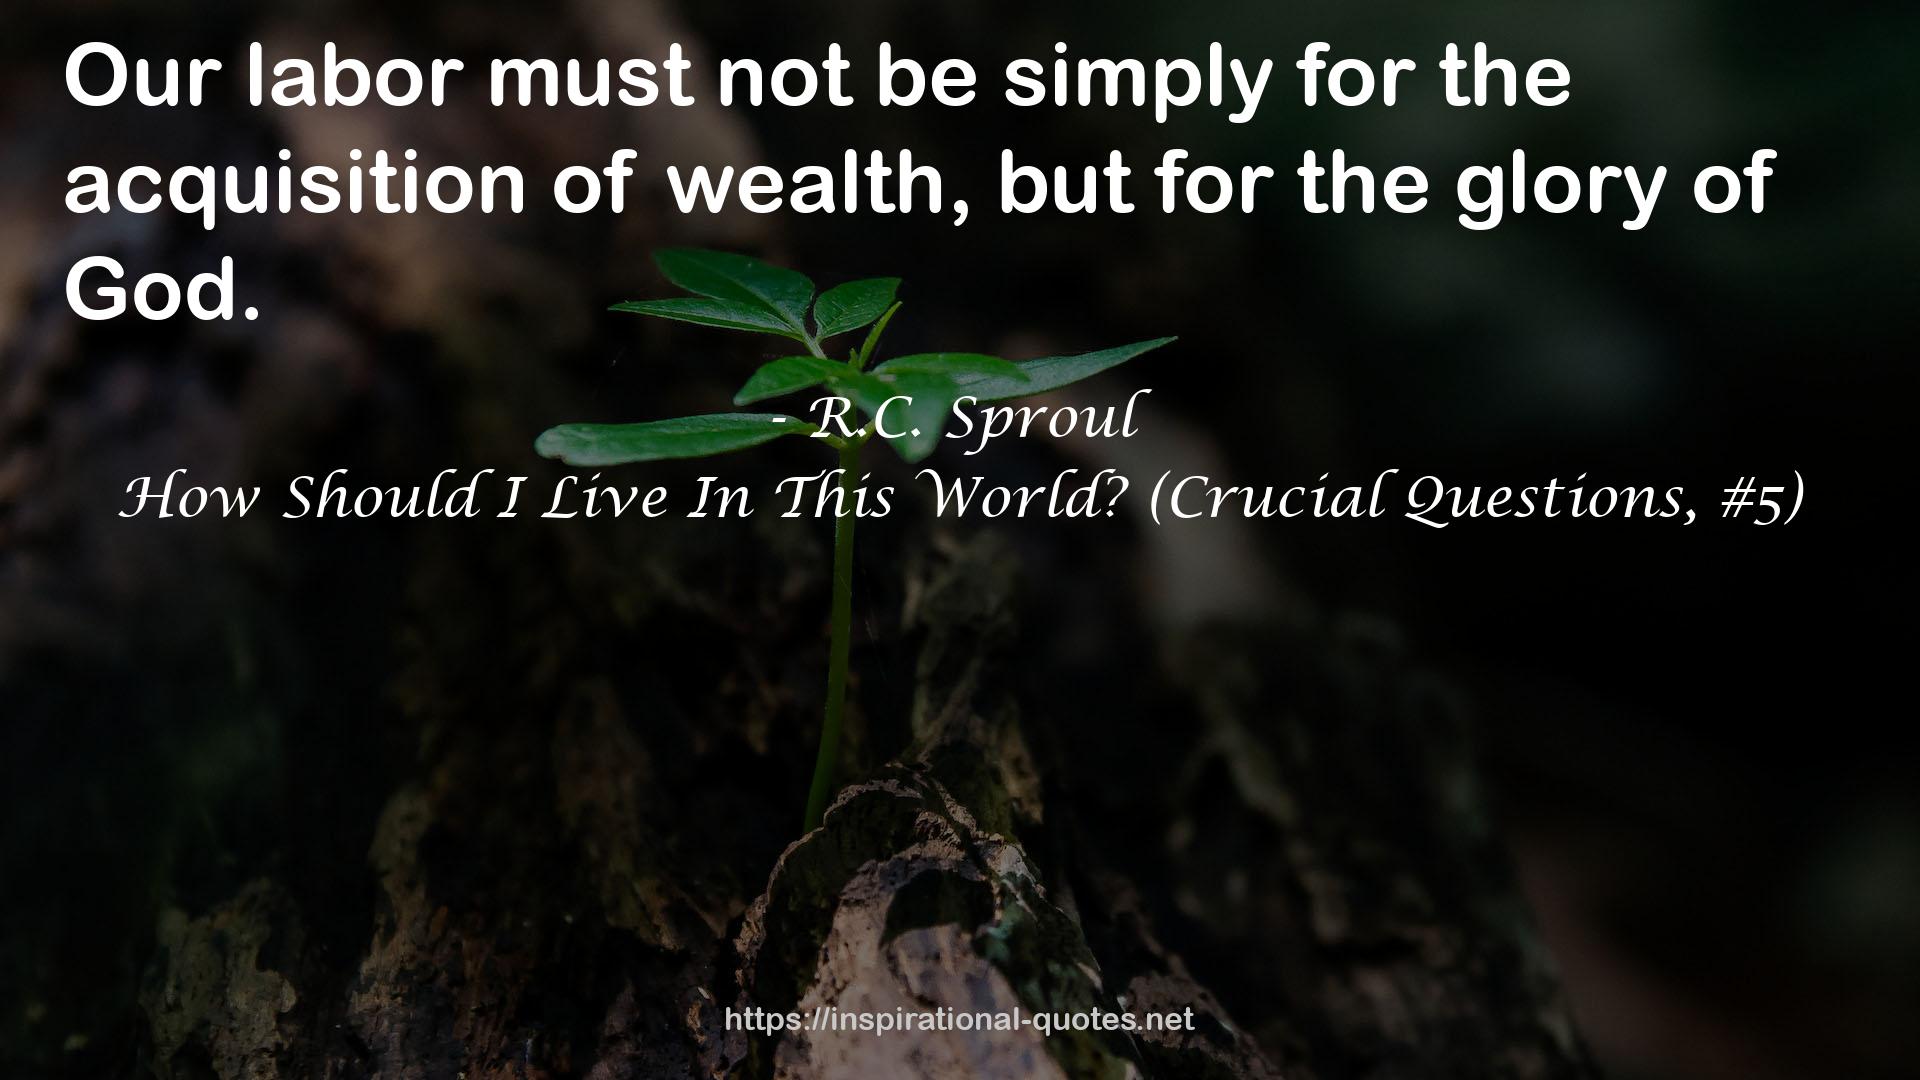 How Should I Live In This World? (Crucial Questions, #5) QUOTES